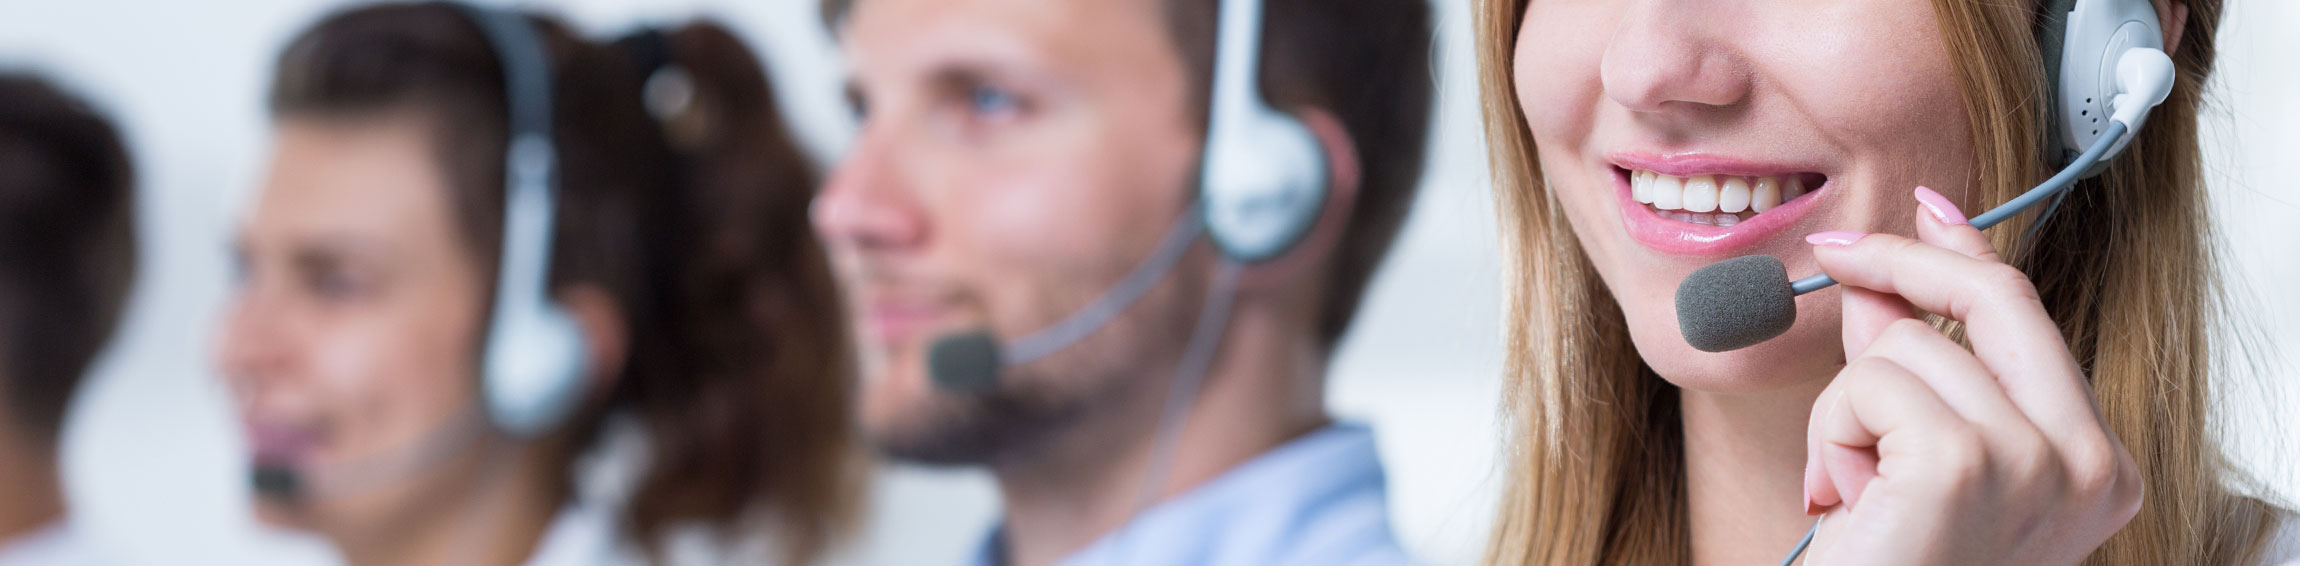 4 Words Telemarketing Agents Should Use During Sales Calls